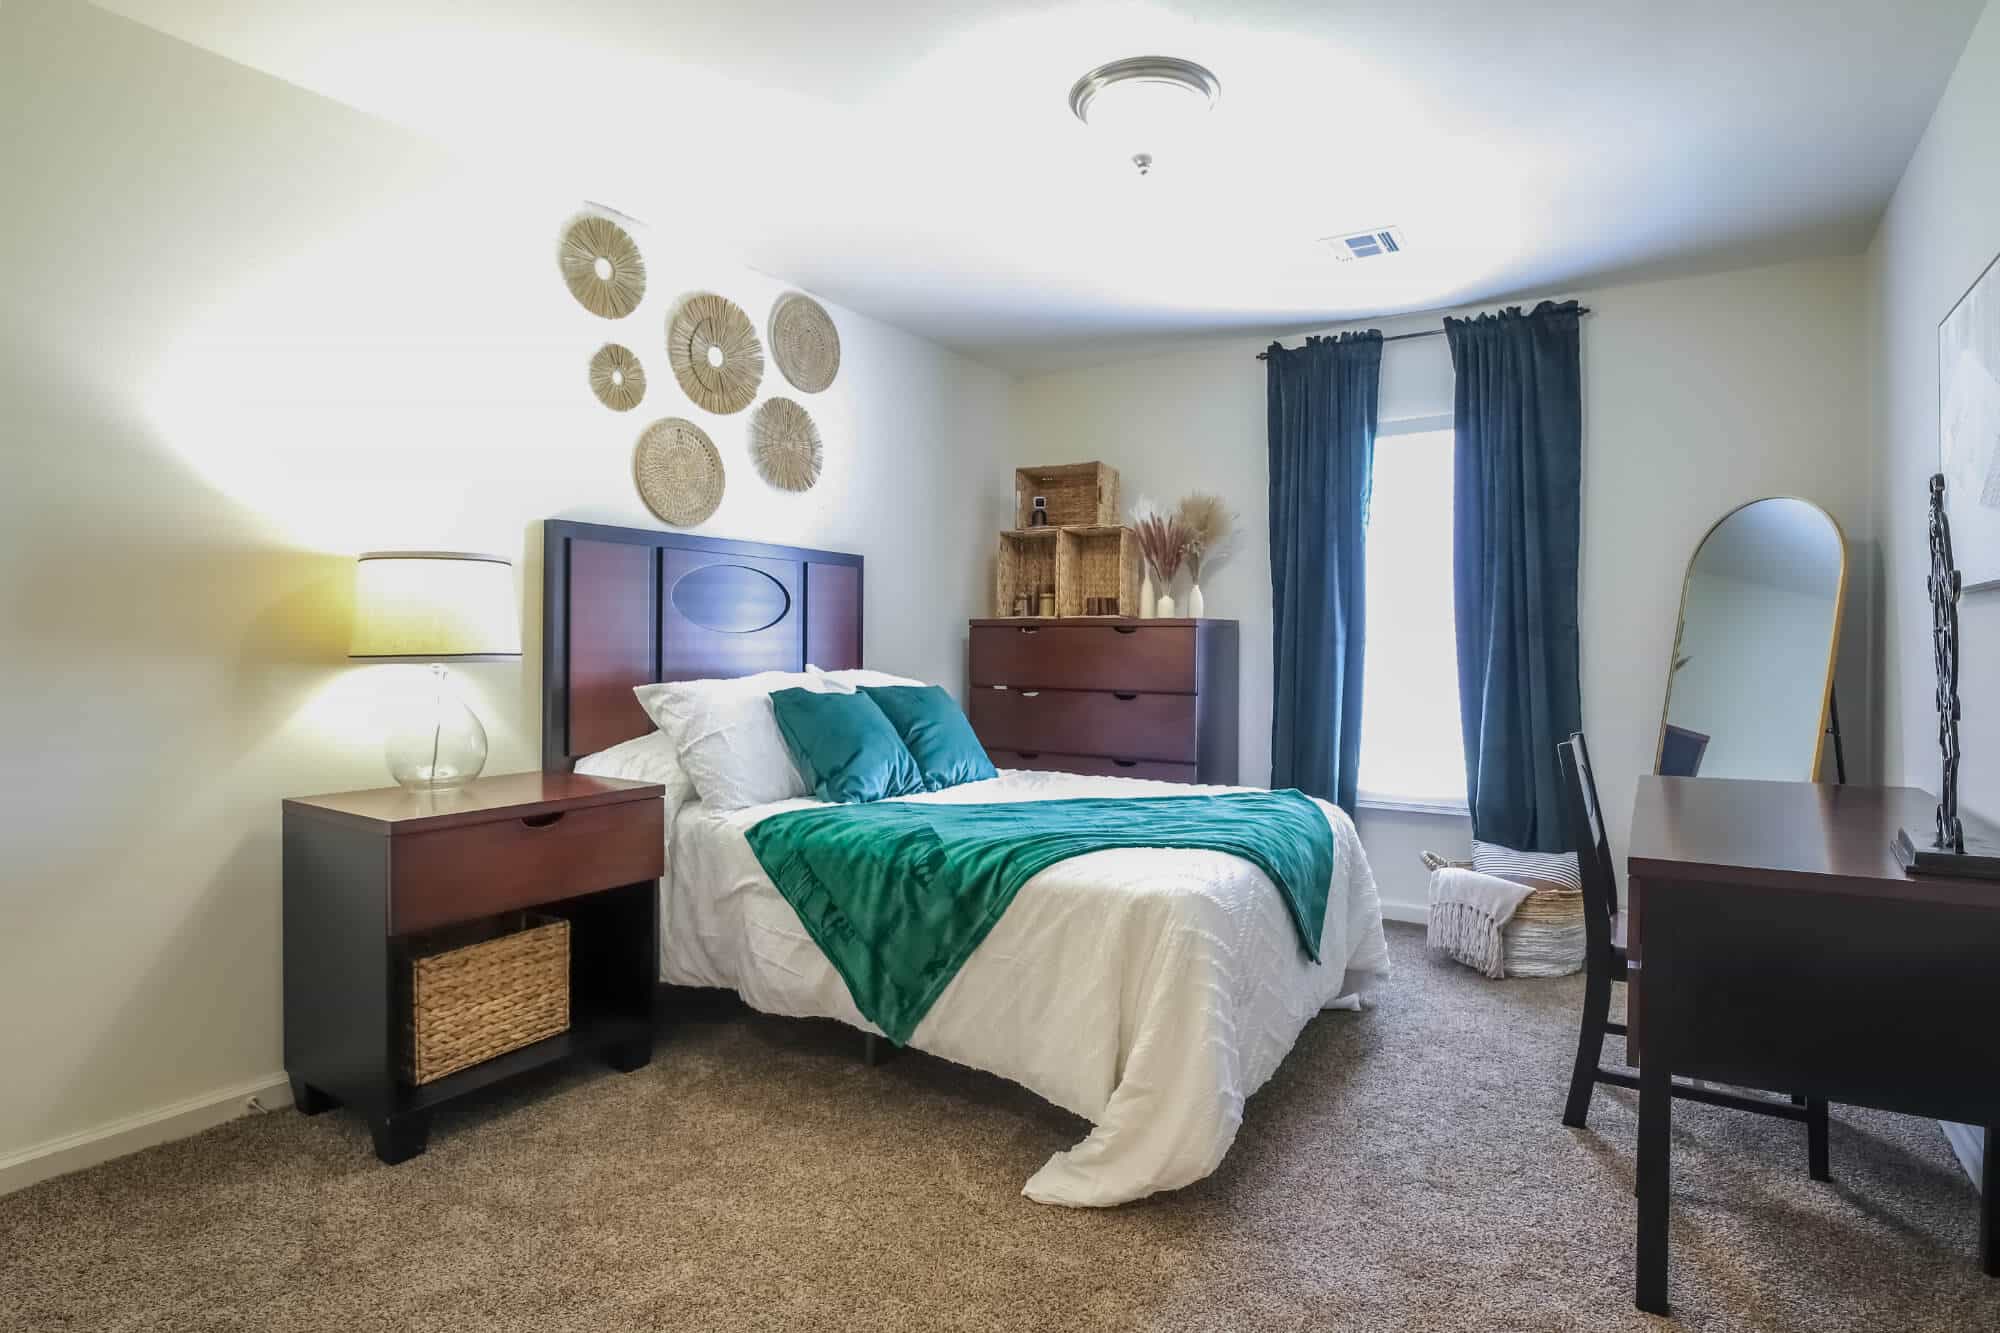 2909 oliver off campus apartments near wichita state university private fully furnished bedrooms